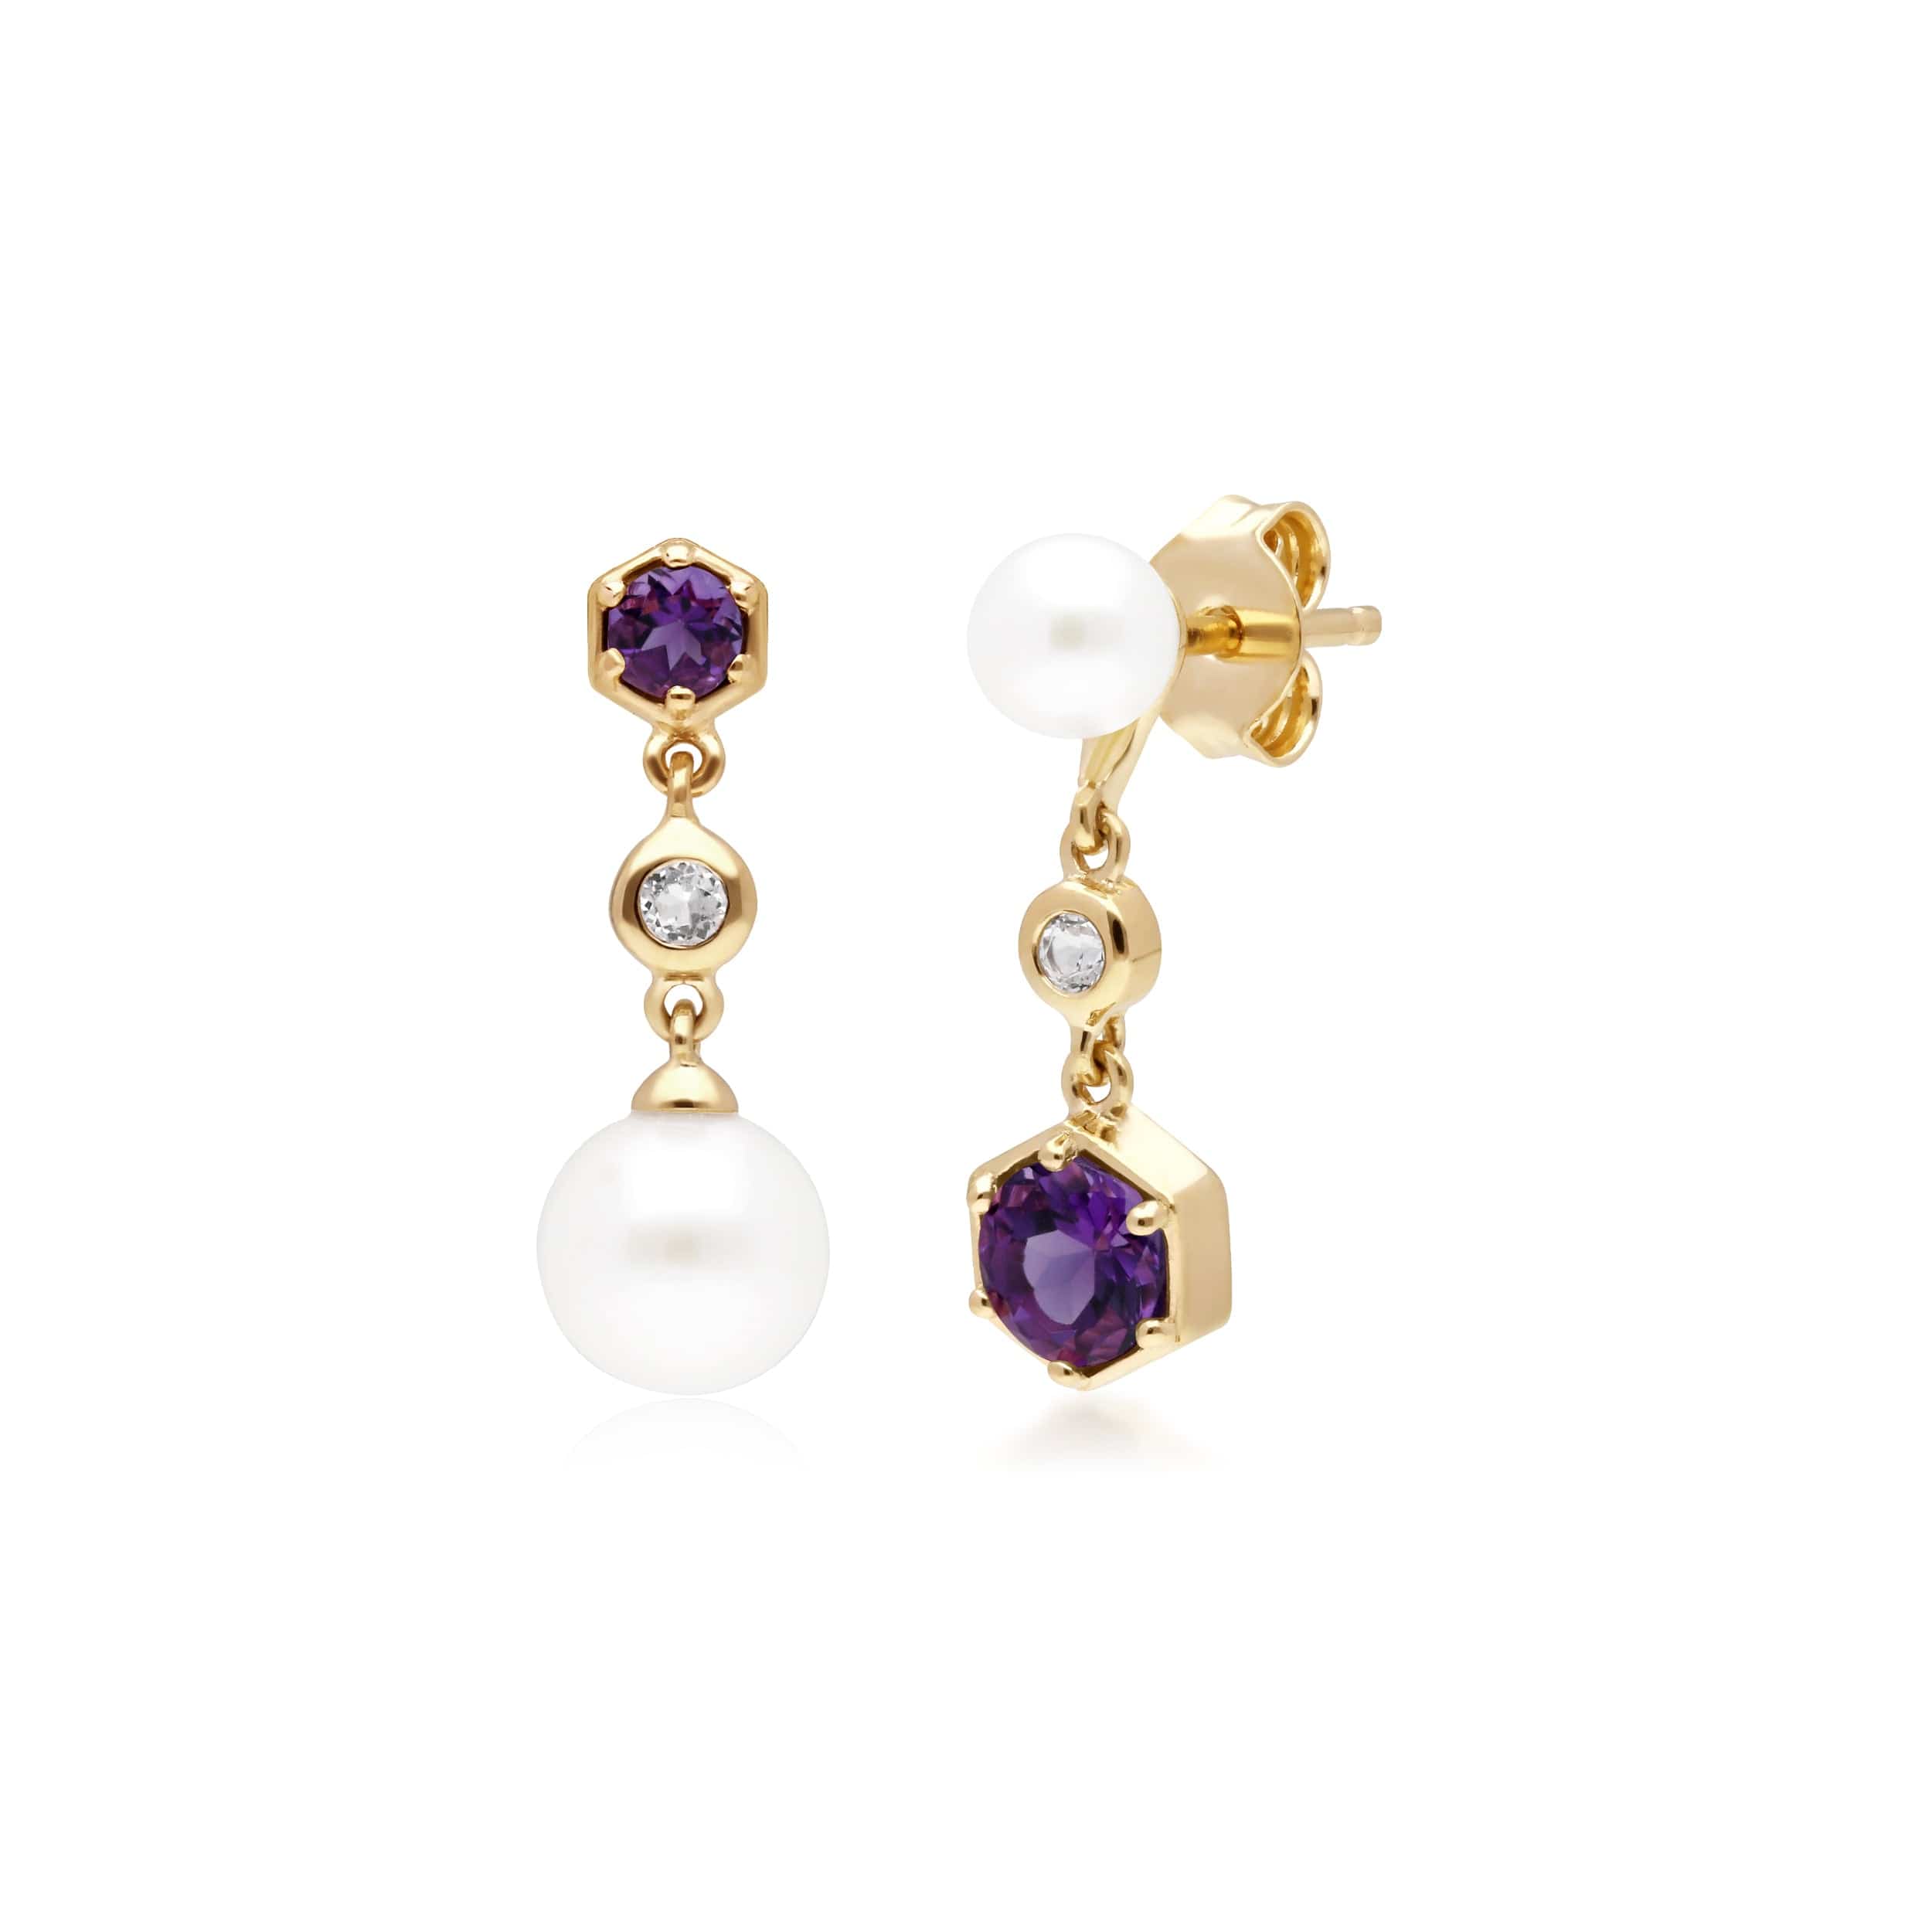 Modern Pearl, Amethyst & Topaz Mismatched Drop Earrings in Gold Plated Silver